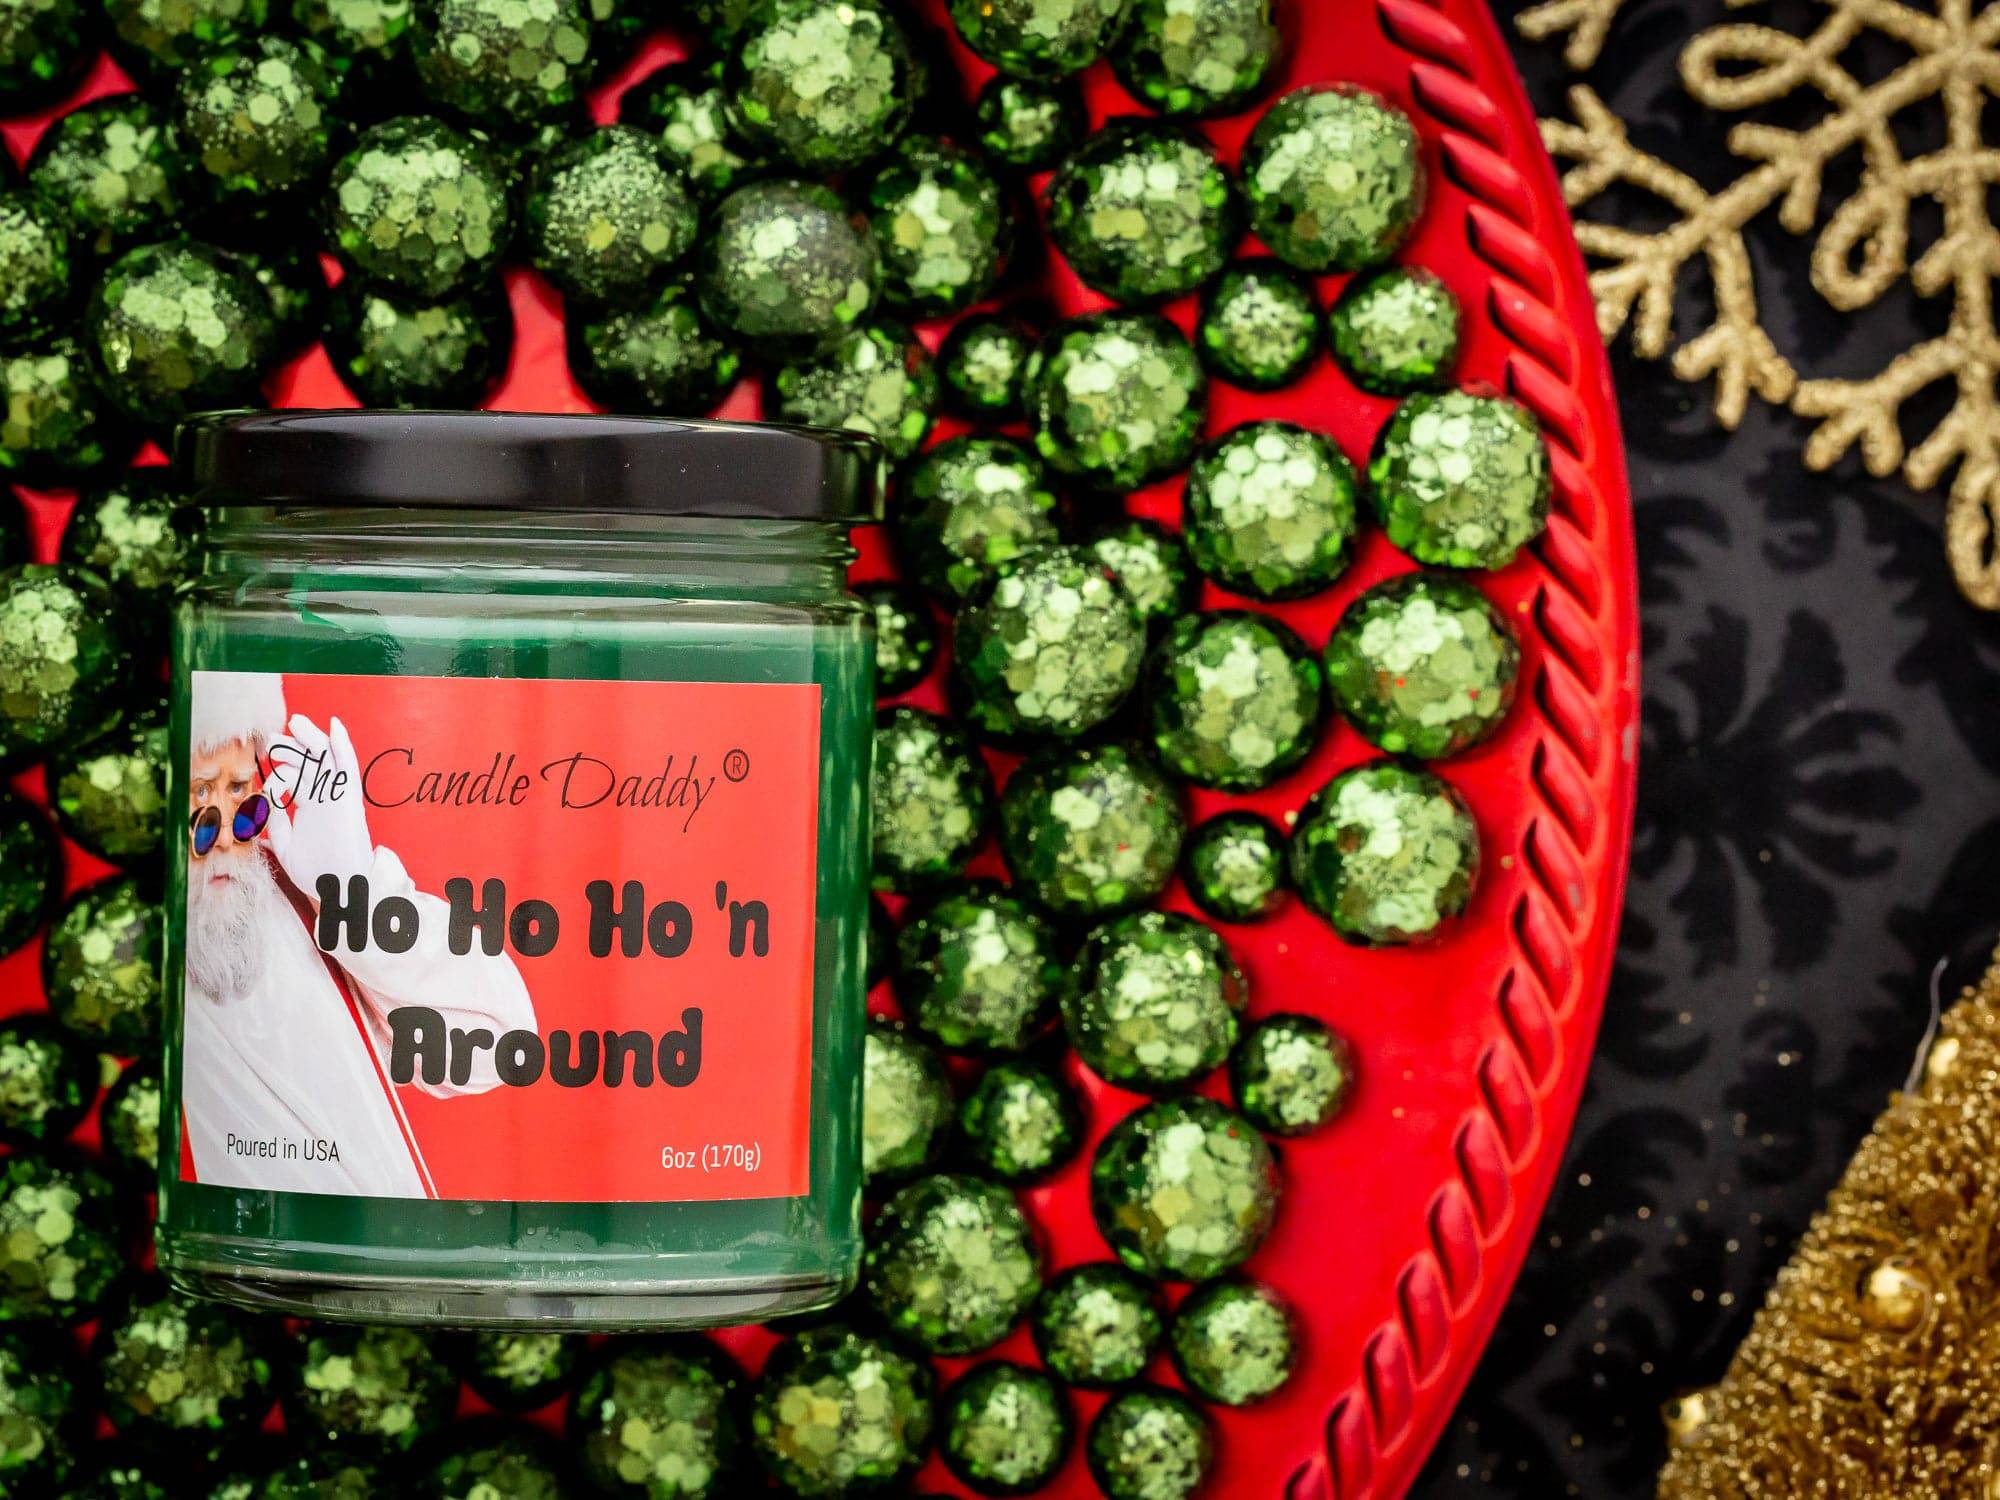 Ho Ho Ho's in This House Candle Funny Christmas Gifts for Women